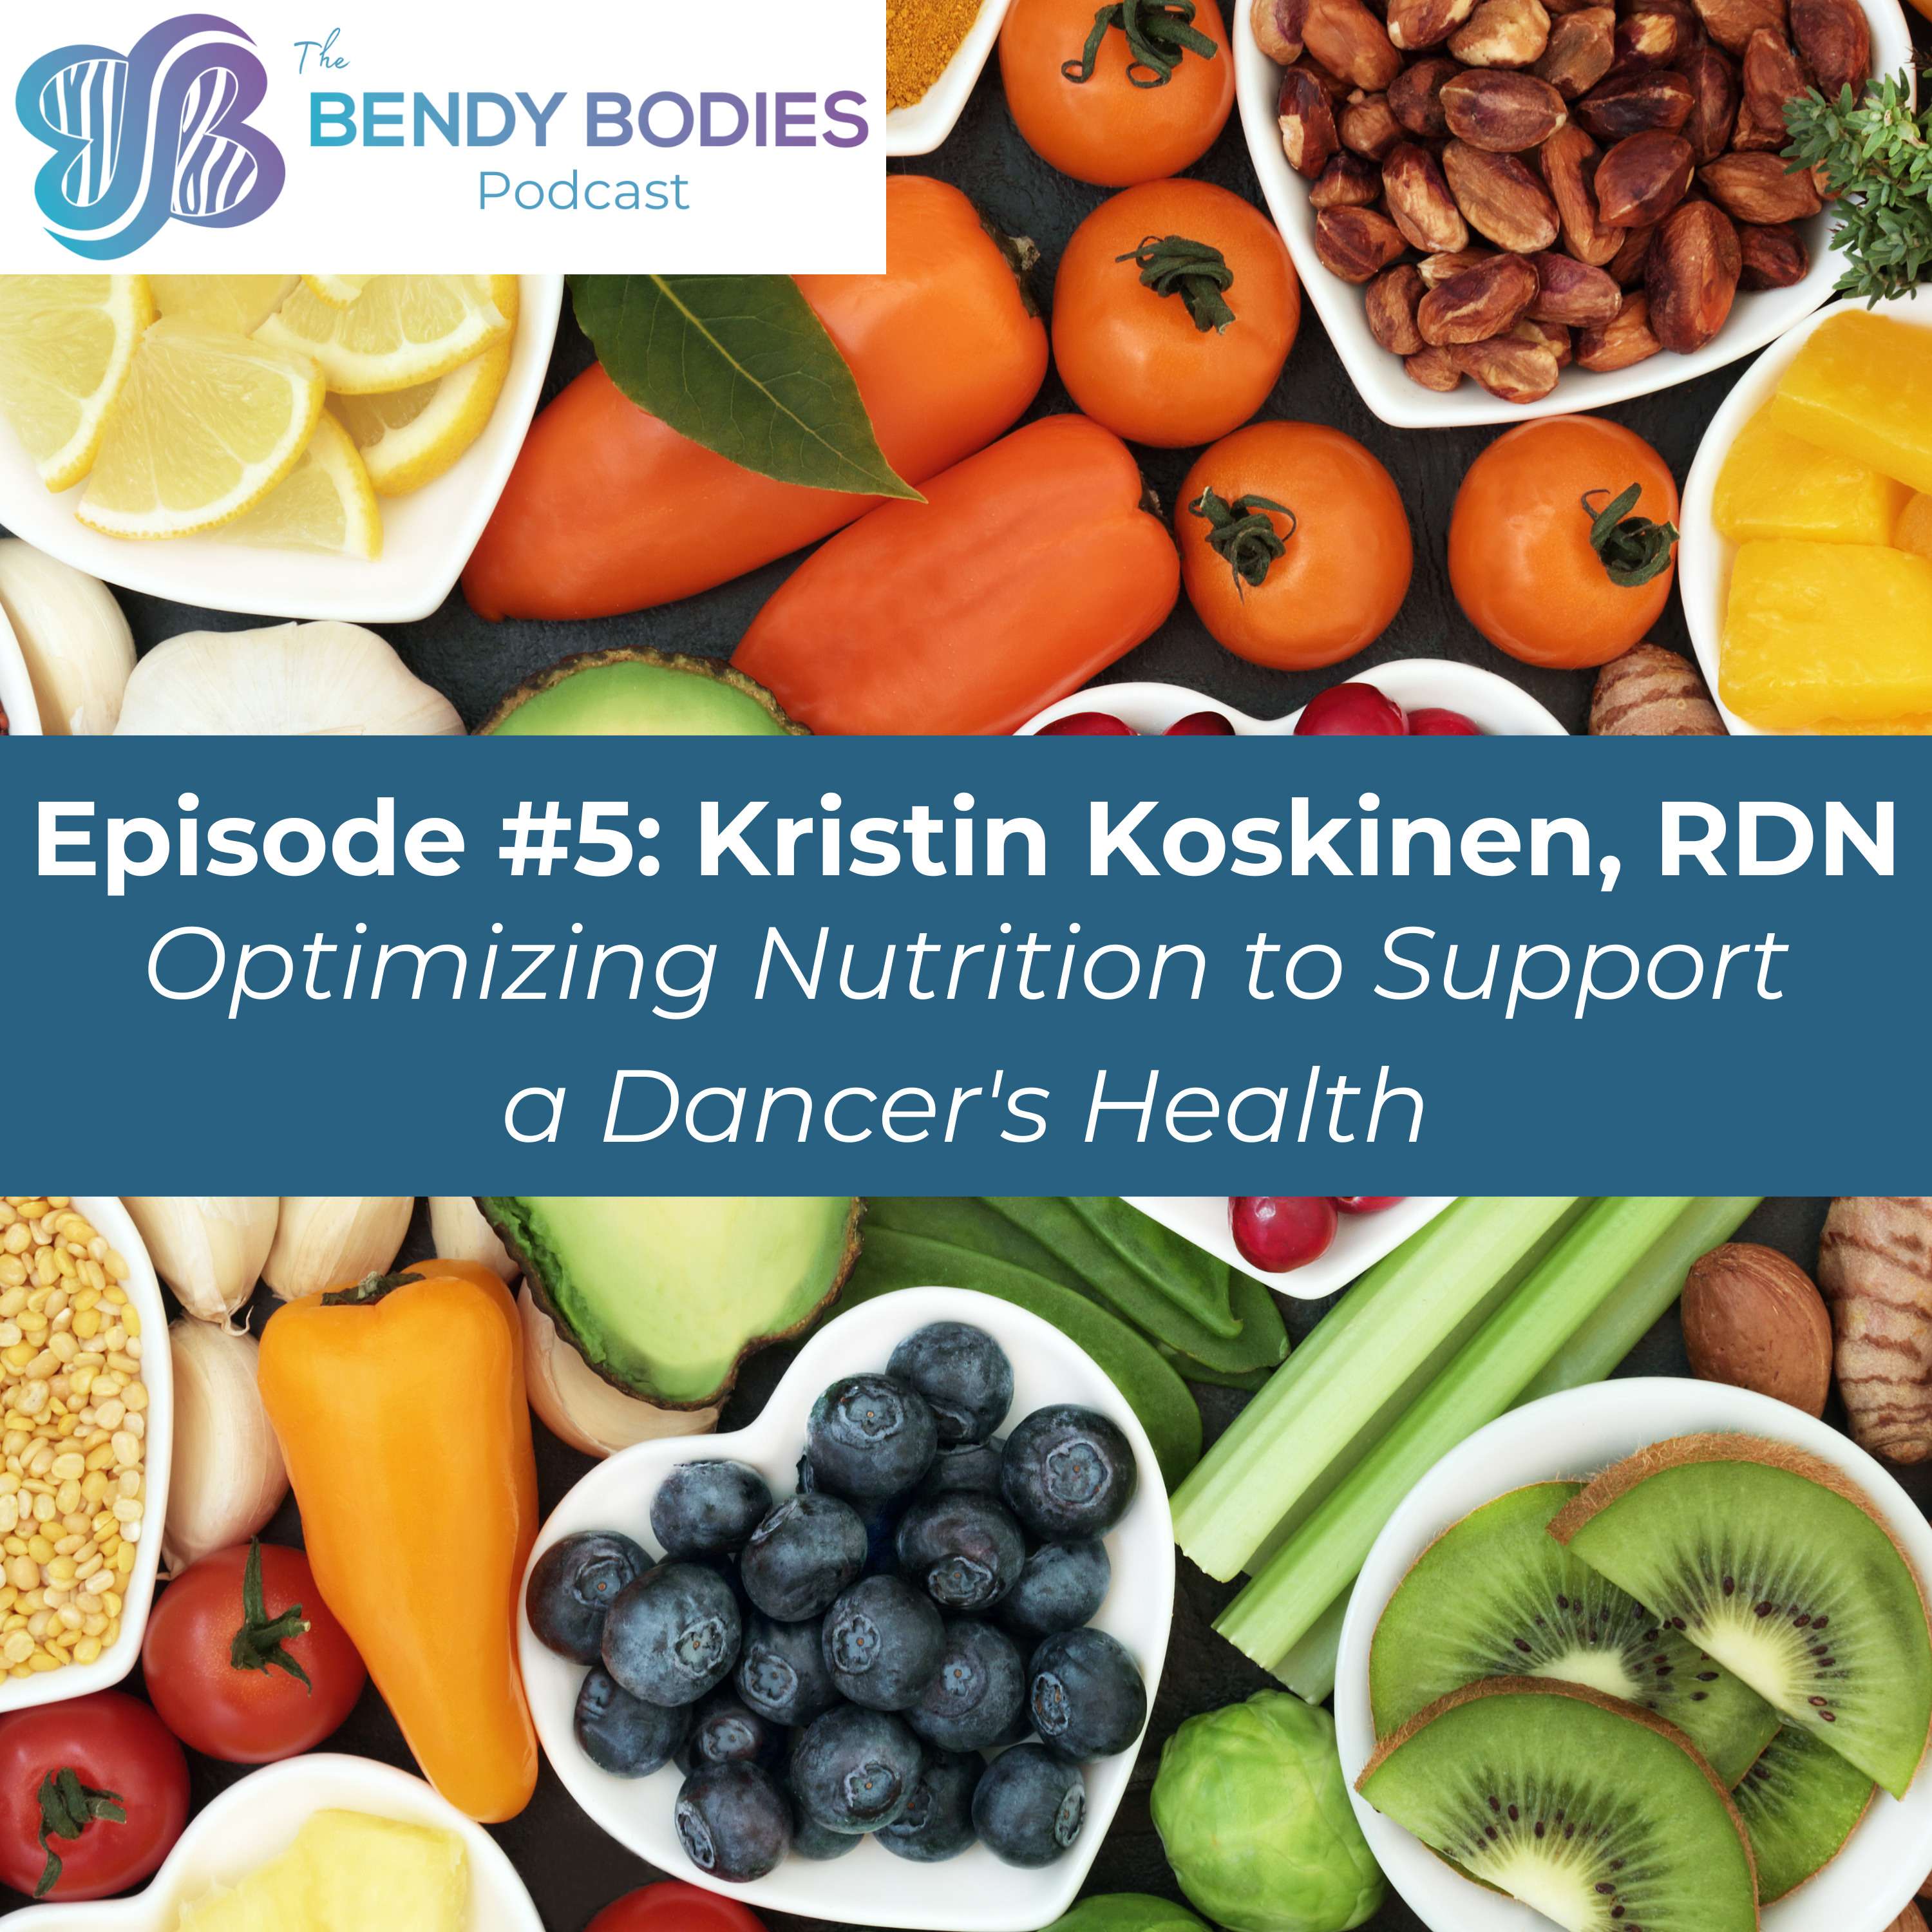 5. Optimizing Nutrition to Support a Dancer’s Health with Kristin Koskinen, RDN